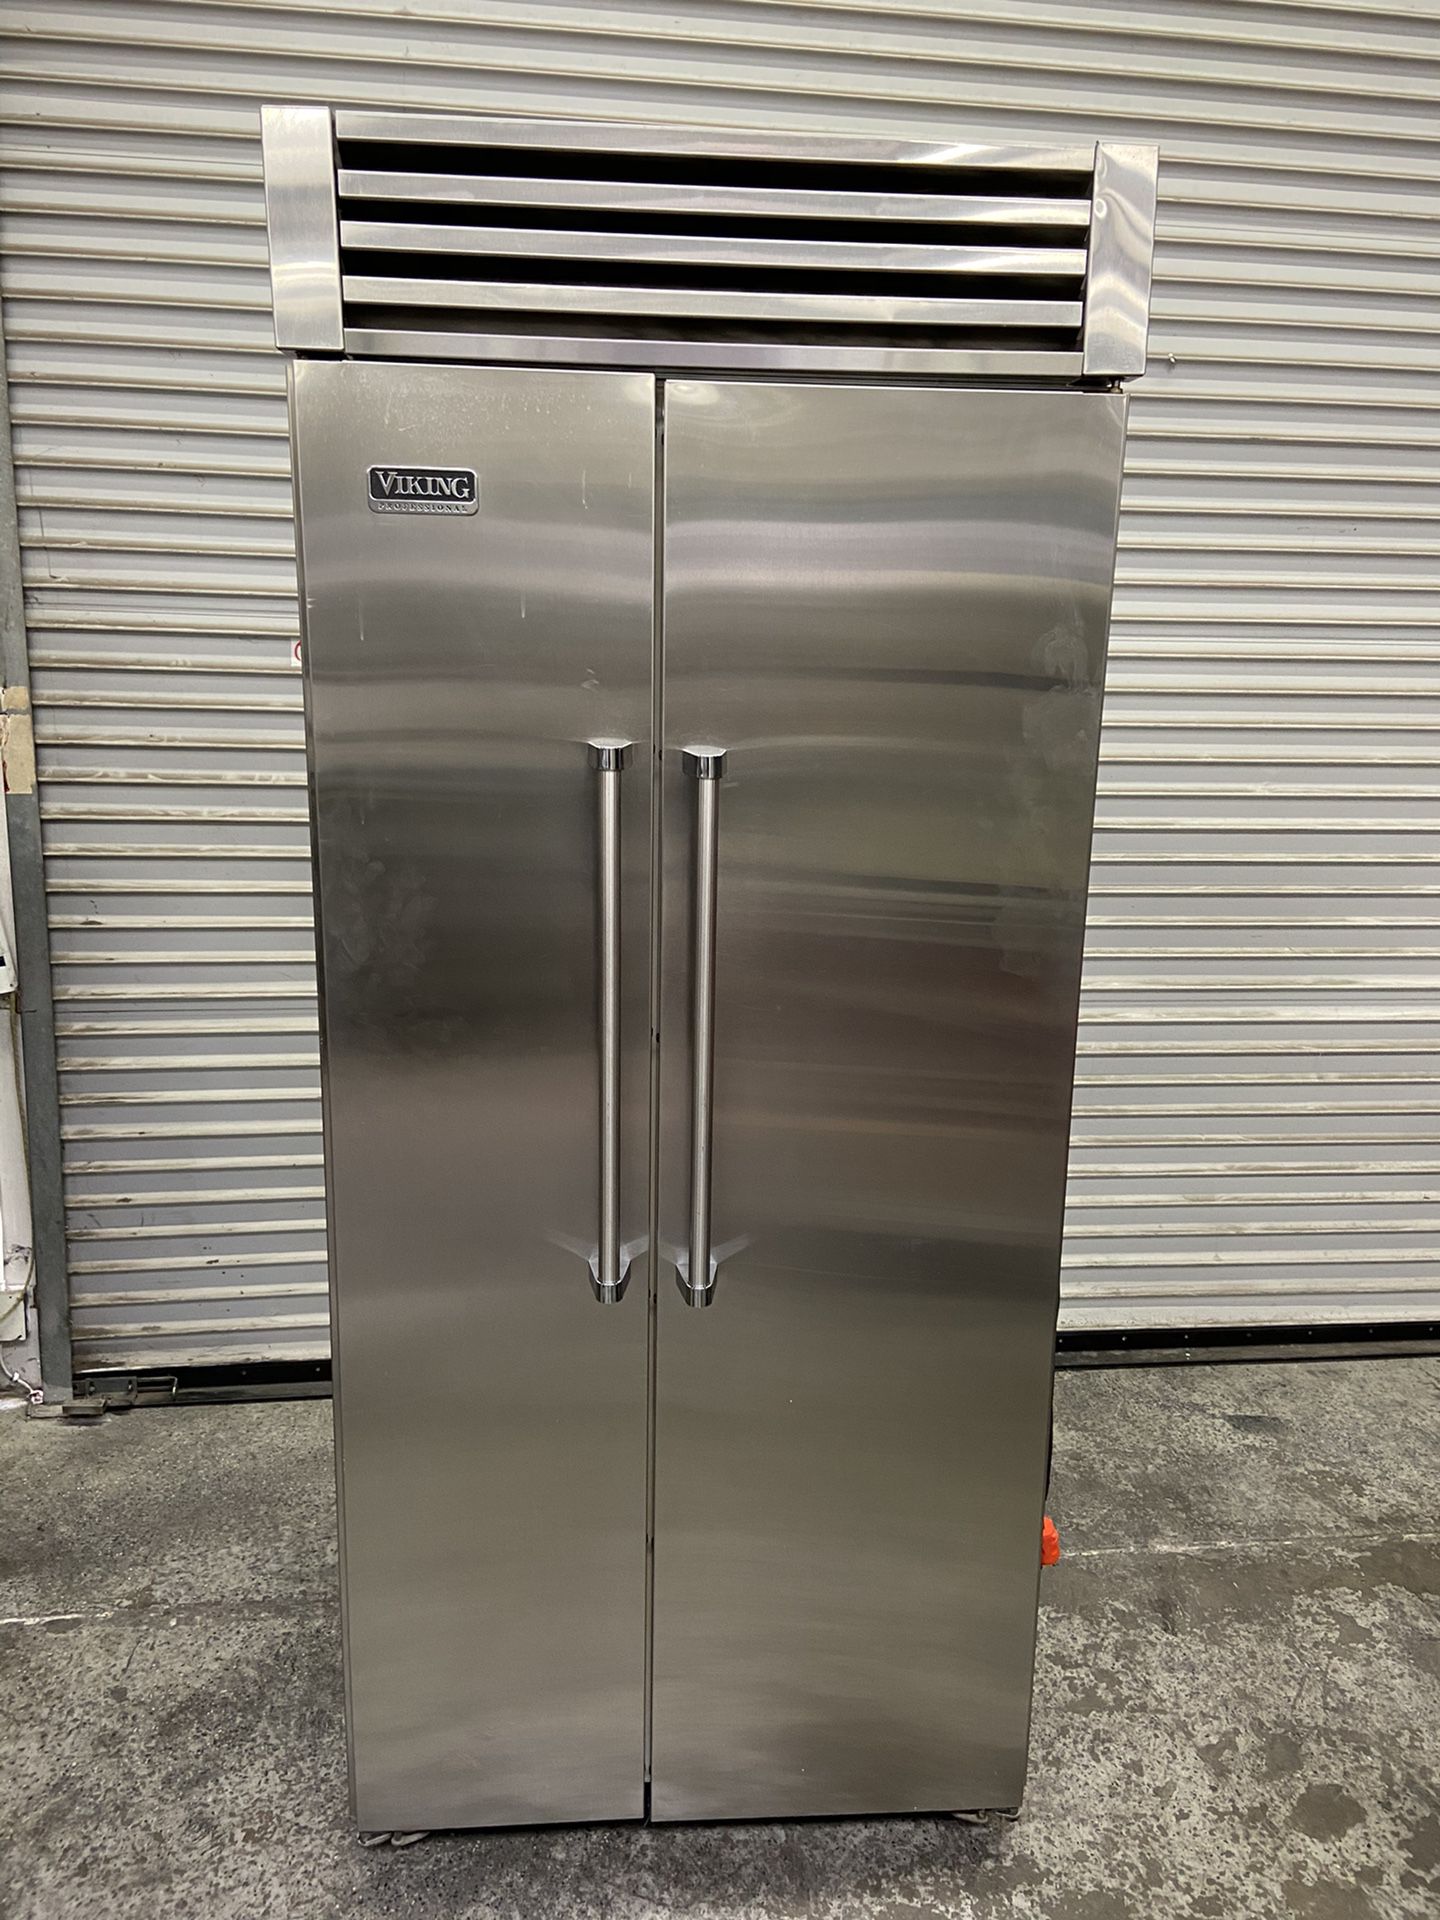 36” Viking Professional Refrigerator Side by Side 2 Door Domestic Stainless Steel Solid